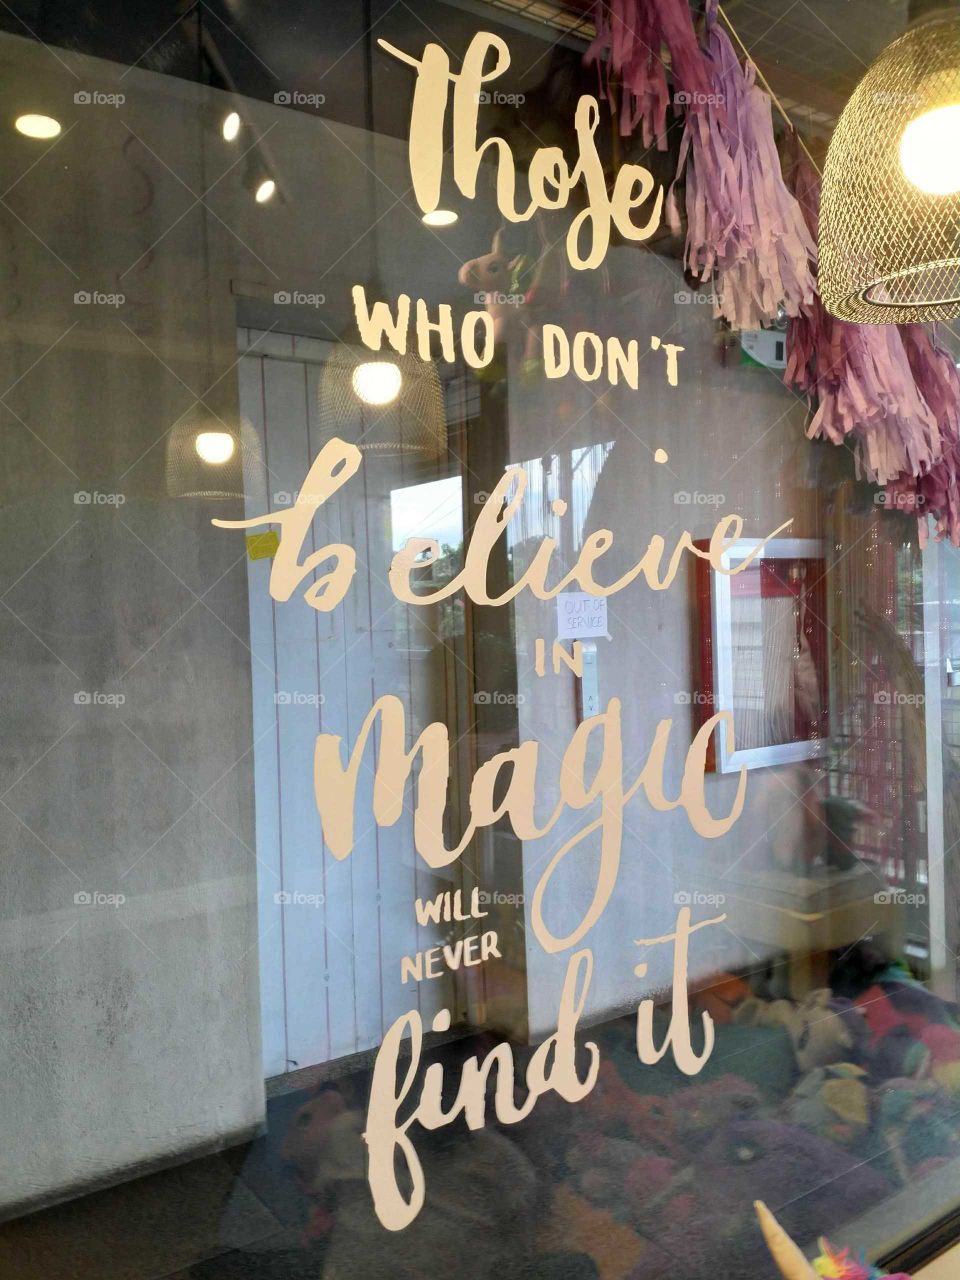 "Those who don't believe in magic will never find it"